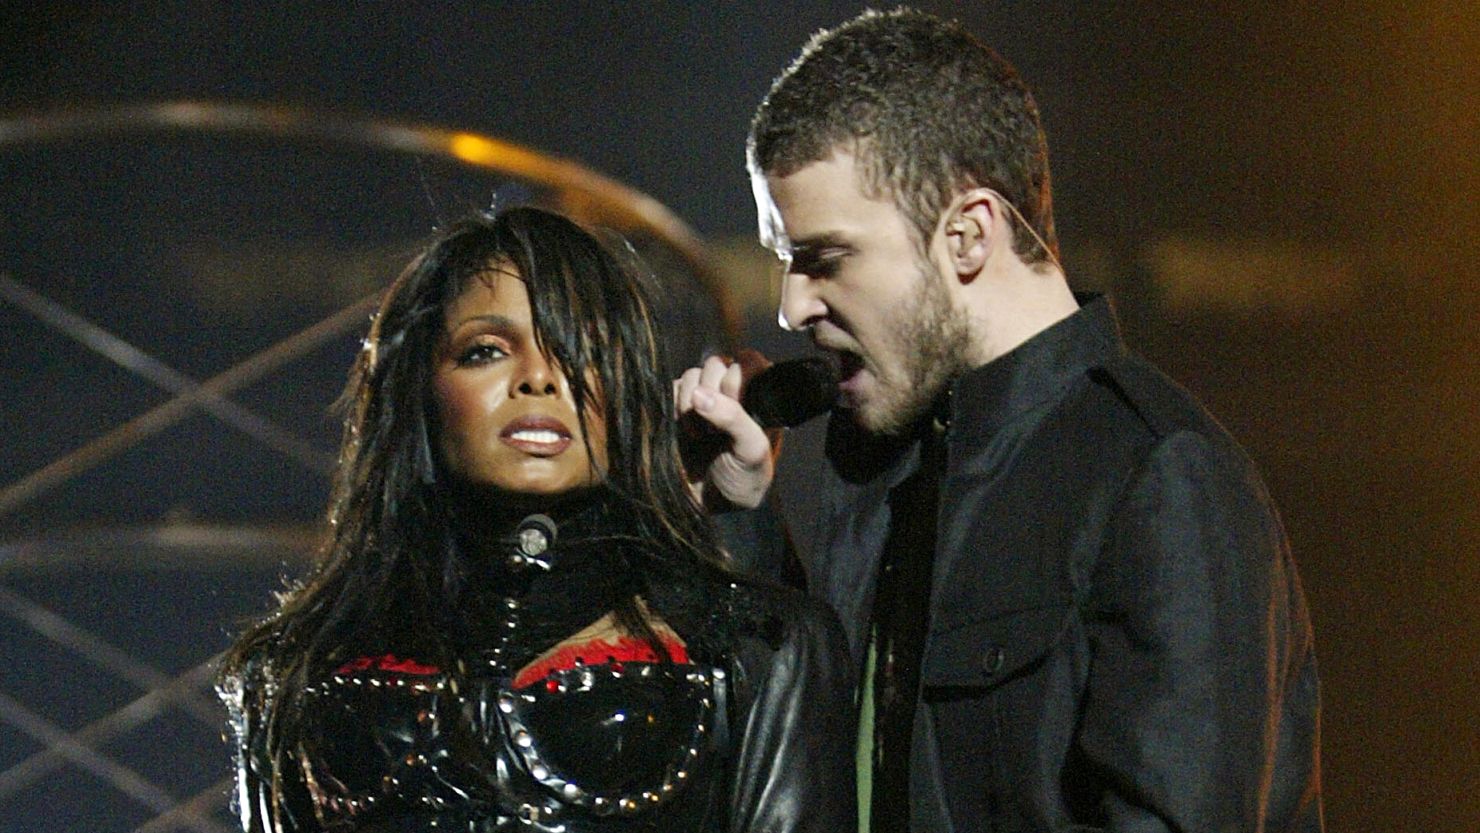 Janet Jackson and Justin Timberlake perform during the halftime show at Super Bowl XXXVIII between the New England Patriots and the Carolina Panthers at Reliant Stadium on February 1, 2004 in Houston, Texas.